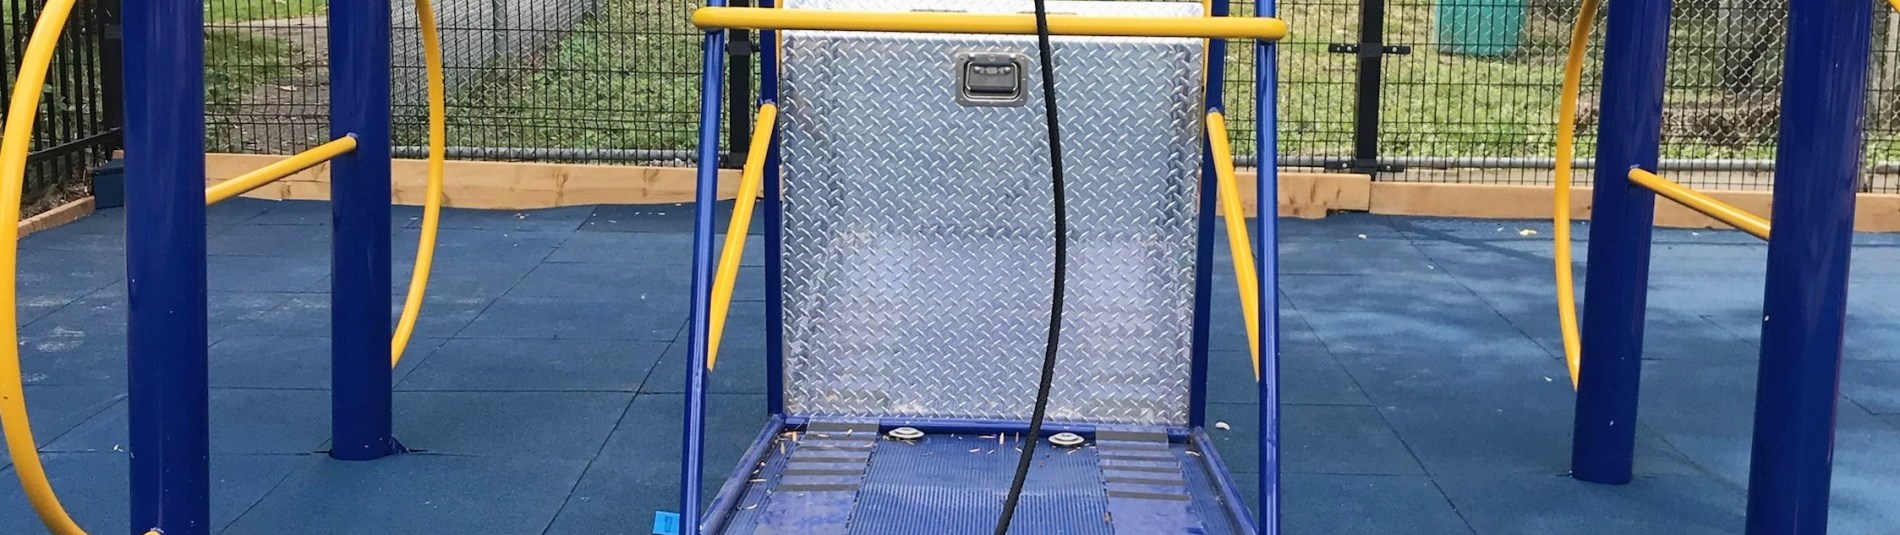 Accessible swing